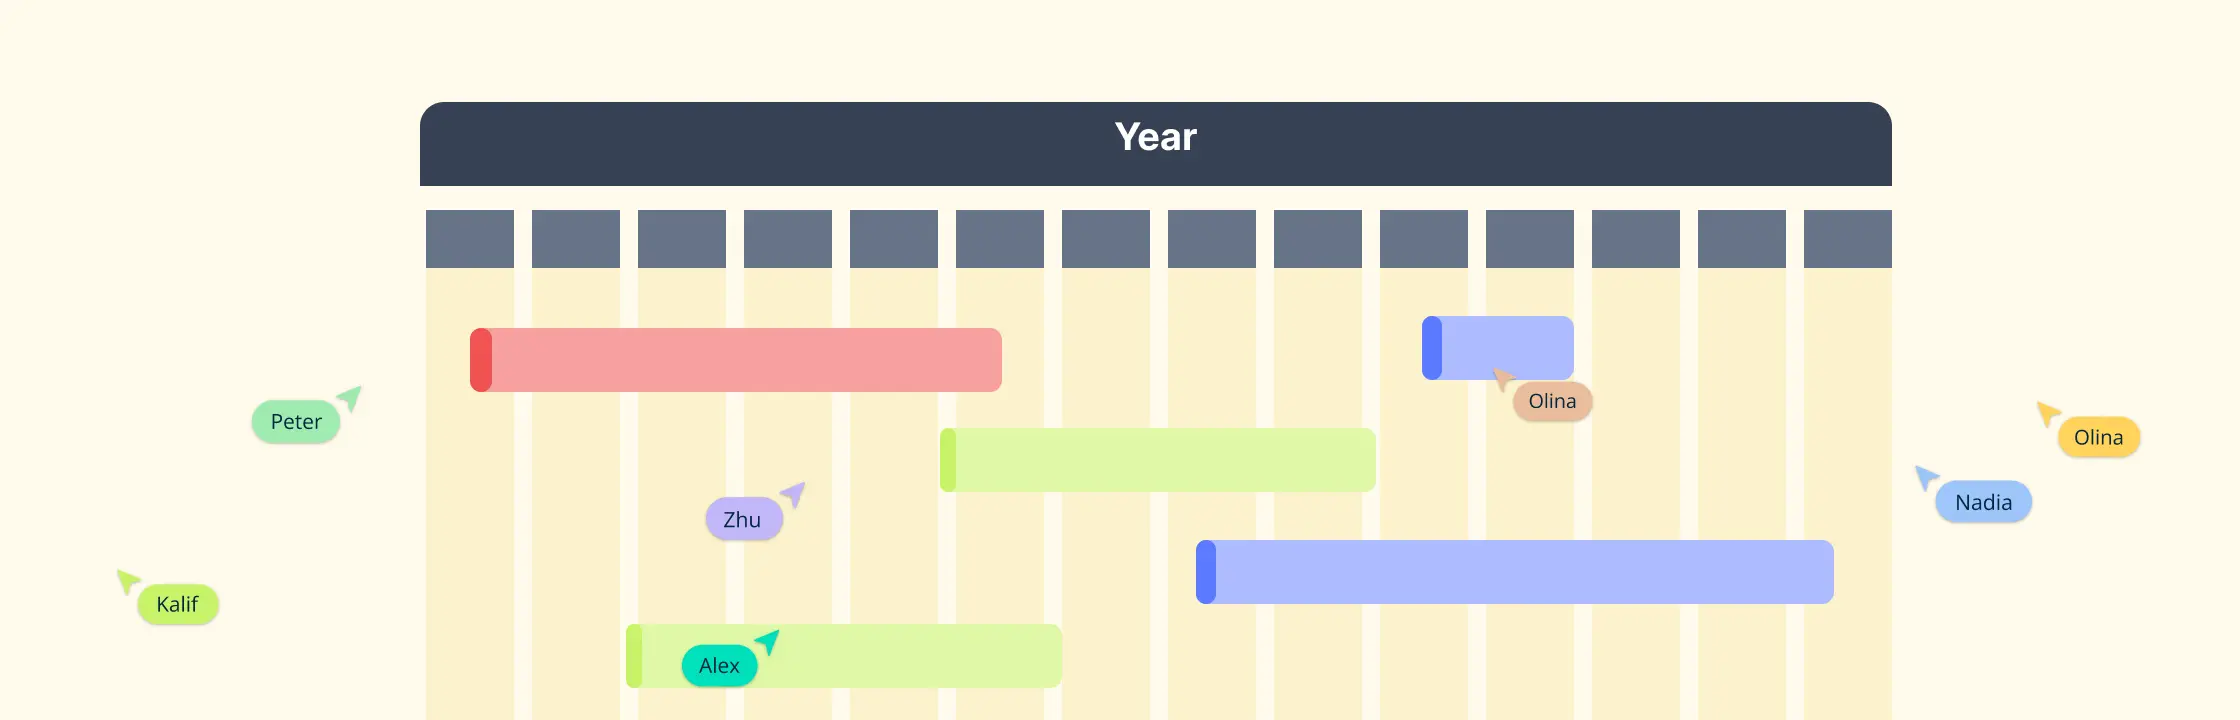 How to Create a Gantt Chart: Complete Guide with Templates